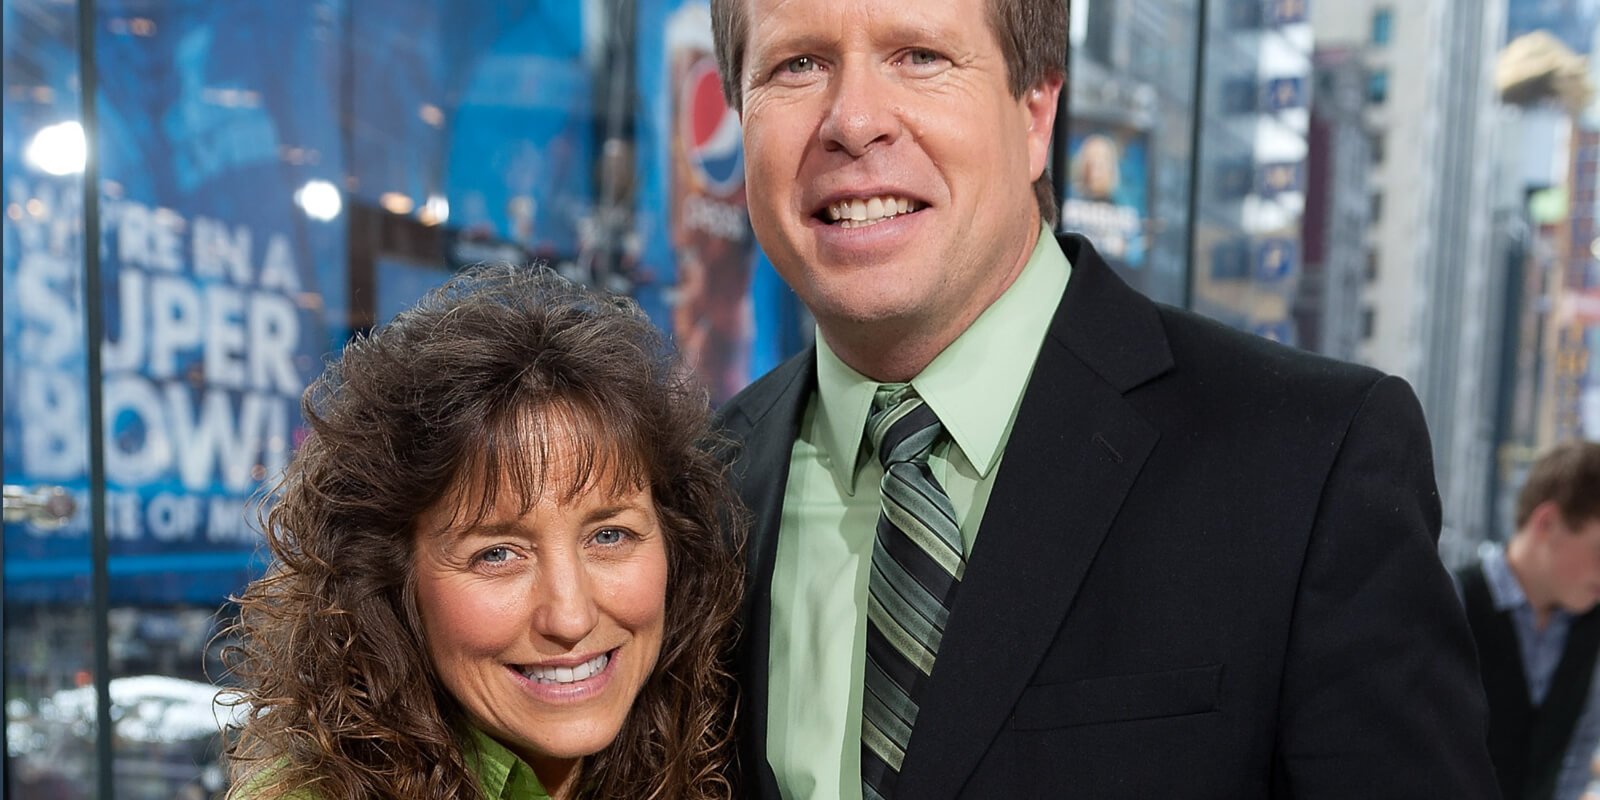 Michelle and Jim Bob Duggar pose during an appearance on the television show 'Extra.'